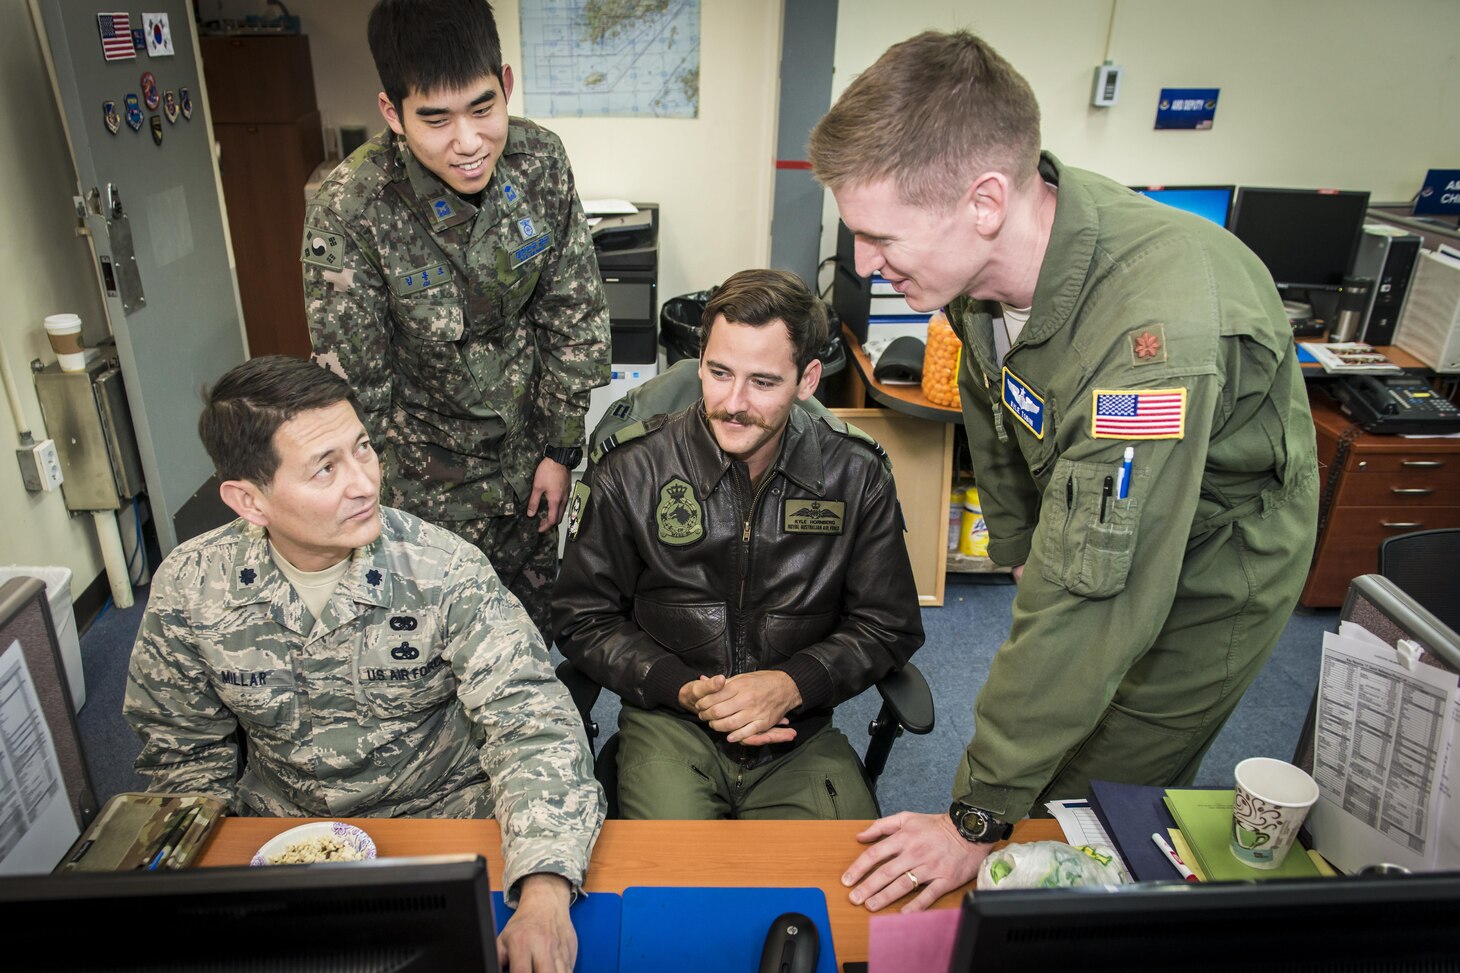 U.S. Air Force Lt. Col. Fredrick Millar, left, talks airlift strategy with Royal Australian Air Force Flt. Lt. Kyle Hornberg, right center, and U.S. Air Force Maj. Kyle Tobin, right, as Republic of Korea Air Force 2nd Lt. Dongjo Kim, left center, takes notes for sharing with ROKAF airlift counterparts in the Korean Air Operations Center’s Air Mobility Division during Key Resolve 2017 at Osan Air Base, Republic of Korea, March 22, 2017. The four work together in the AMD ensuring timely airlift support, communication and execution for all Key Resolve missions. Millar is the assistant director of operations and airlift control team member with the 349th Air Mobility Operations Squadron at Travis Air Force Base, California. Hornberg is the Air Mobility Division Multinational Coordination Center liaison officer with the Air Mobility Control Center at Royal Australian Air Force Base Richmond, Australia, Tobin is with the 621st Air Mobility Squadron at Joint Base McGuire-Dix-Lakehurst, New Jersey, and Kim is an interpreting officer with the Air Component Command’s join plans and coordination division at Osan AB. (U.S. Air Force photo by Staff Sgt. Benjamin W. Stratton)